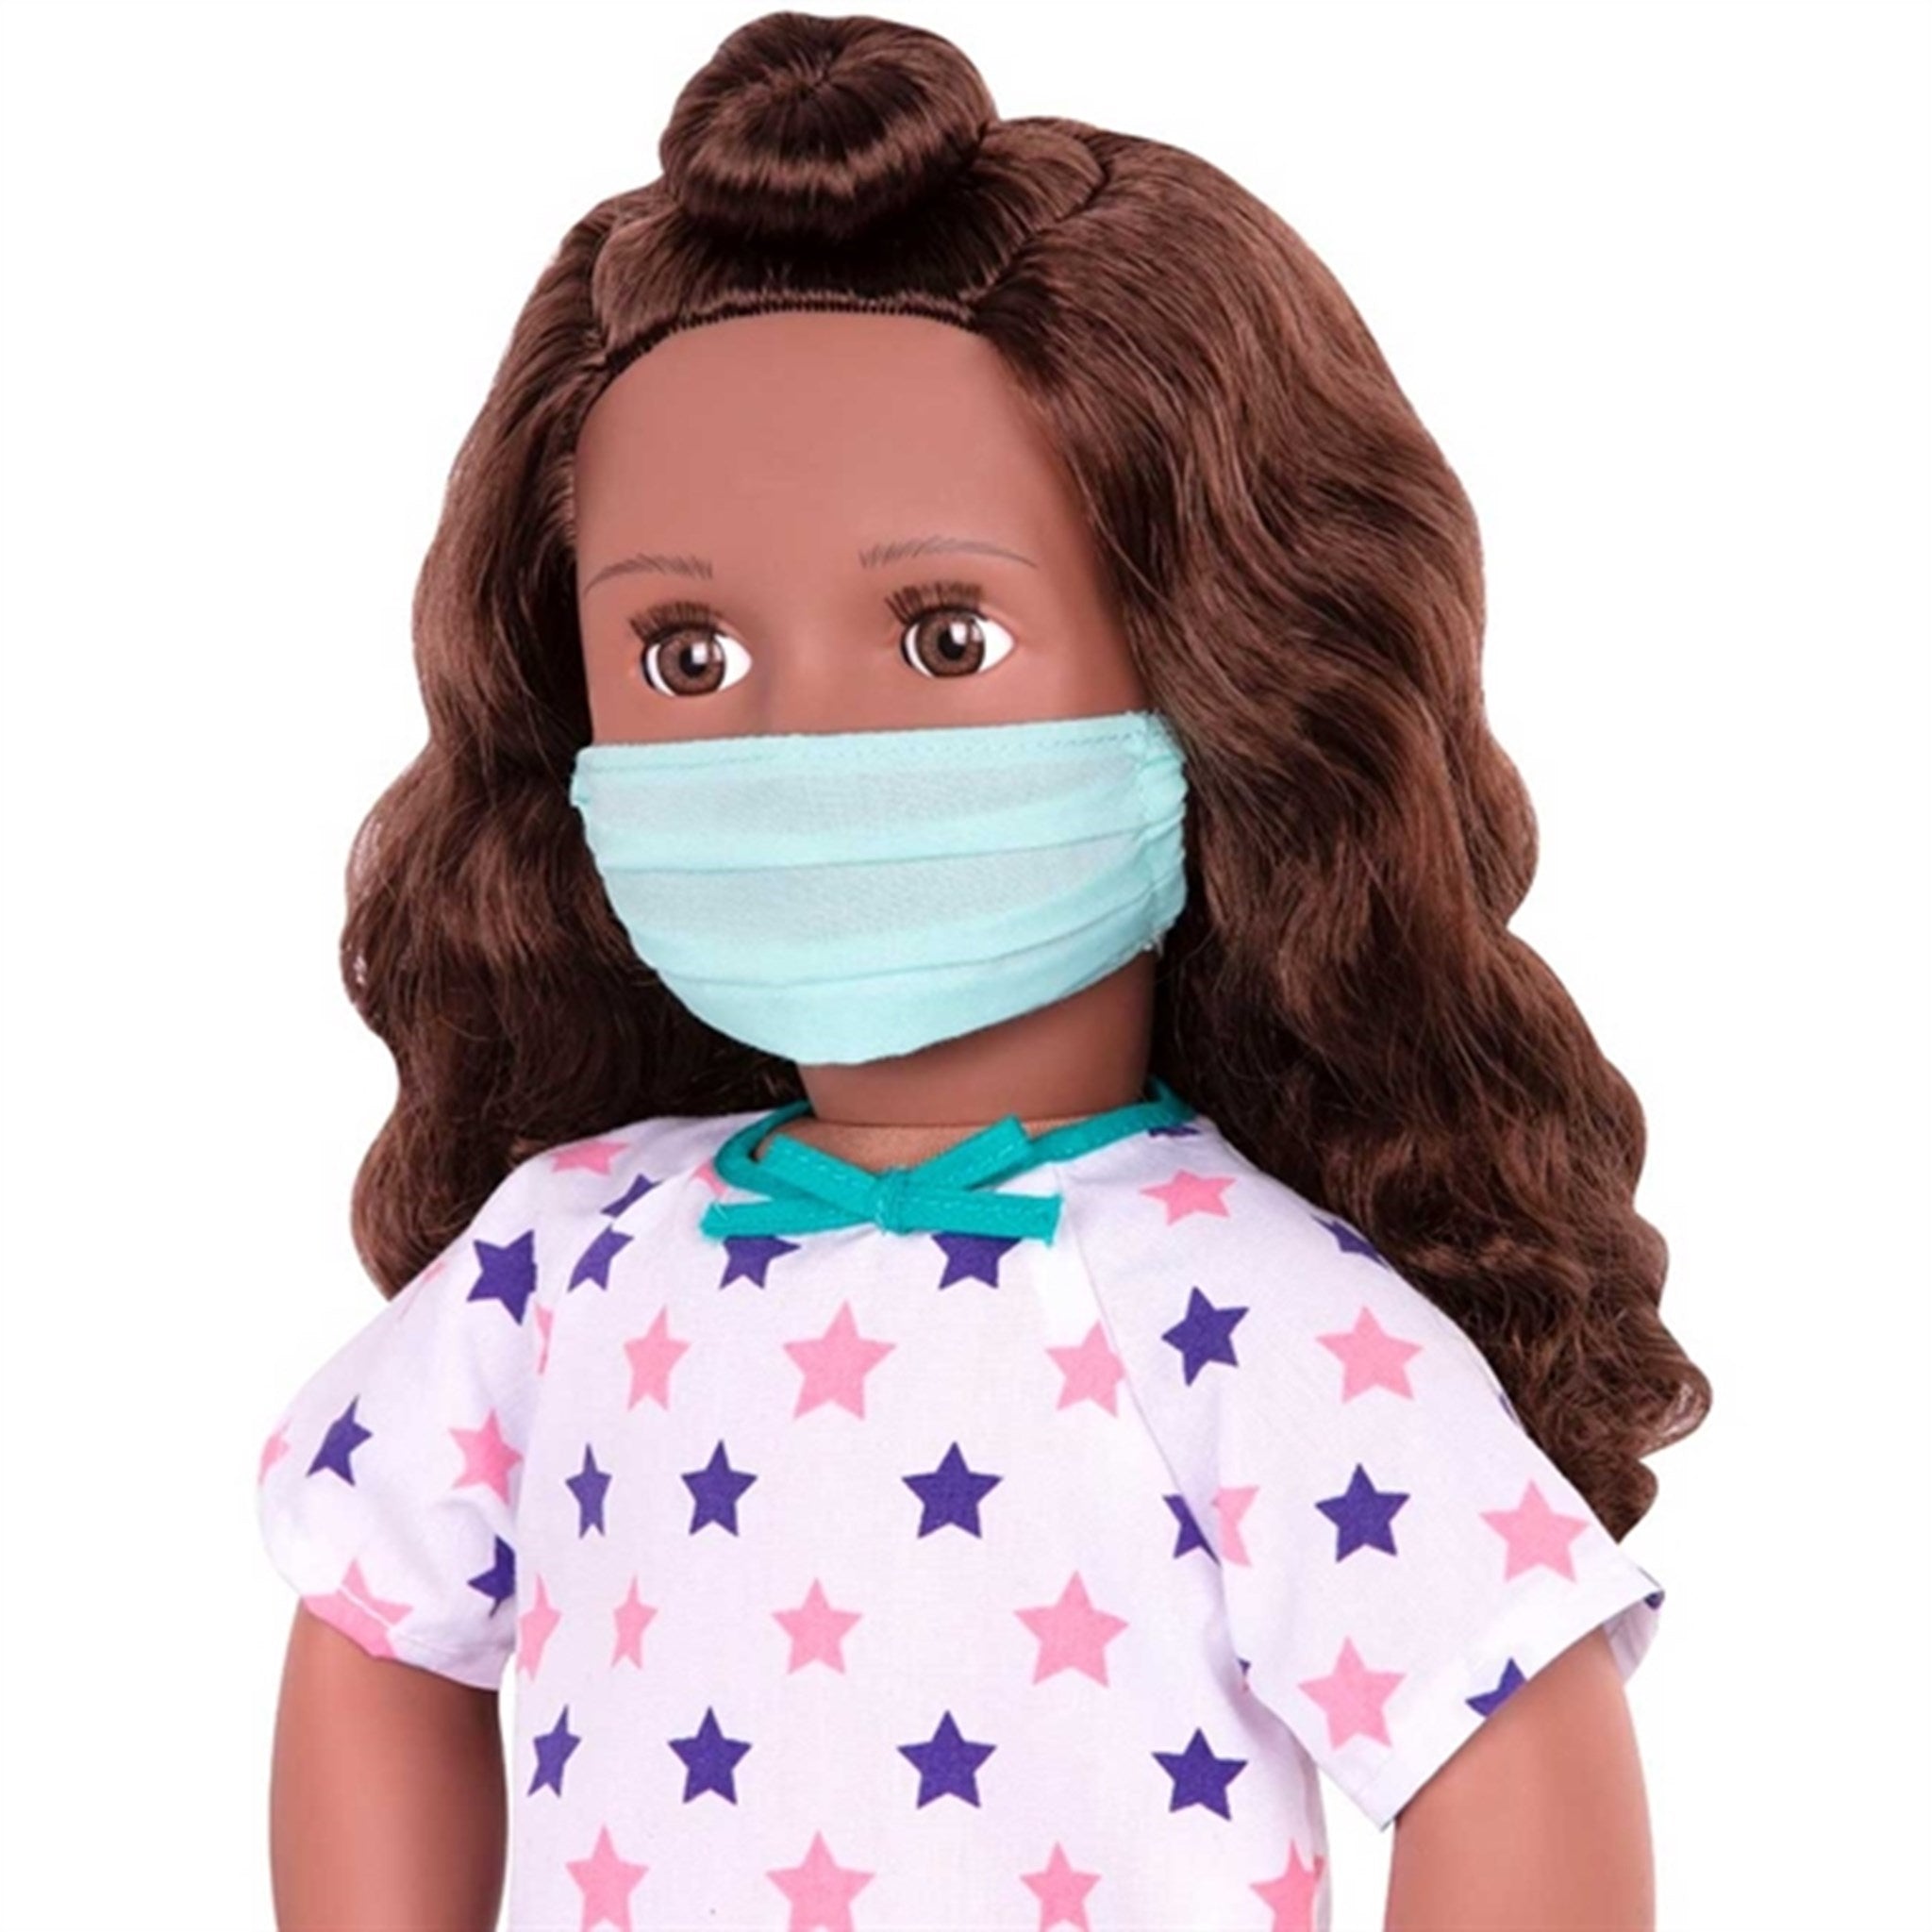 Our Generation Doll - Keisha Patient 4